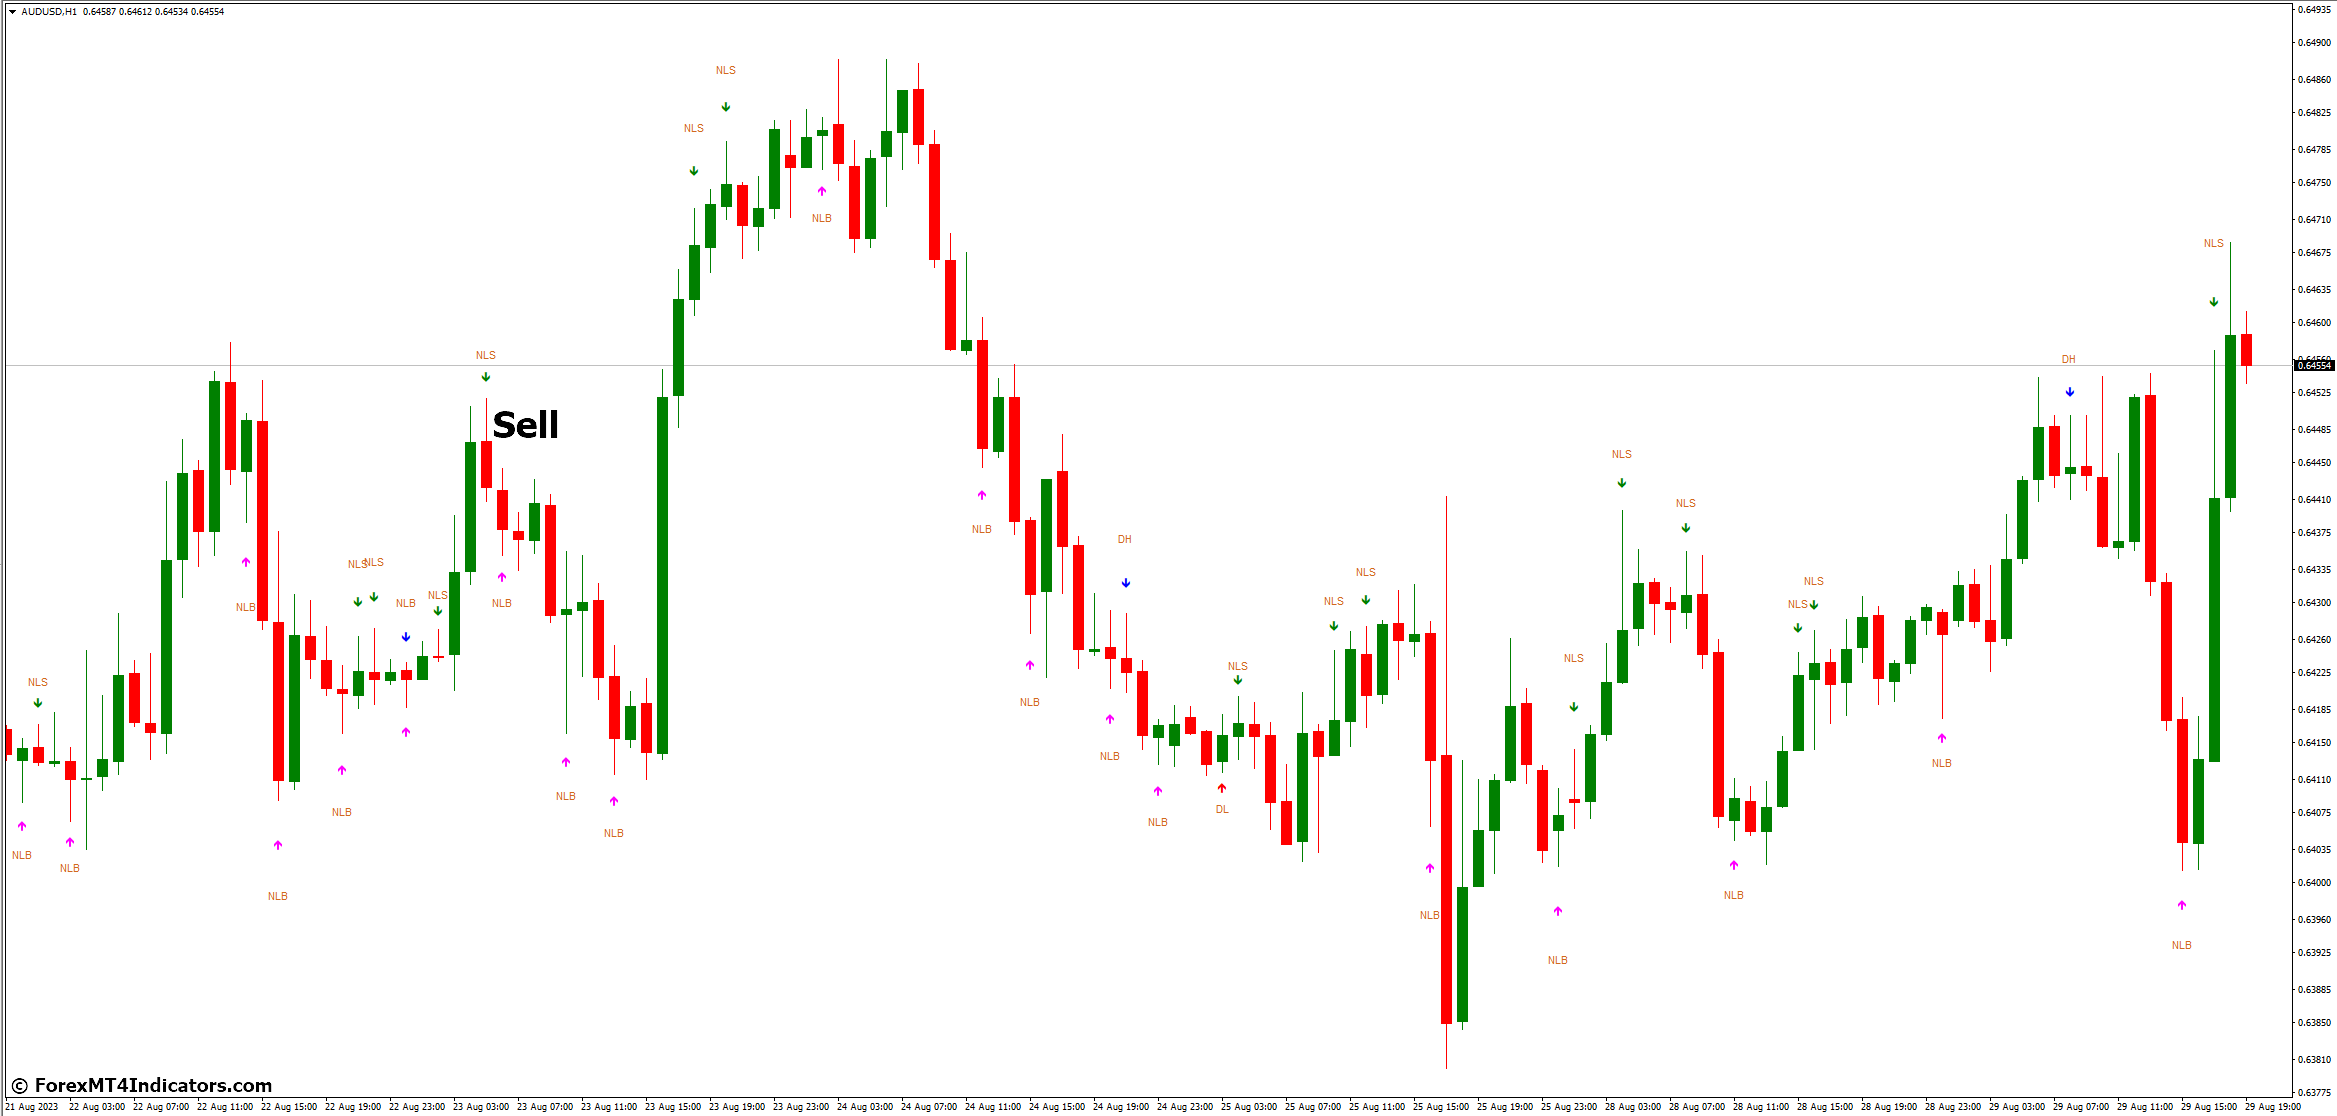 How to Trade with My Price Action MT4 Indicator - Sell Entry